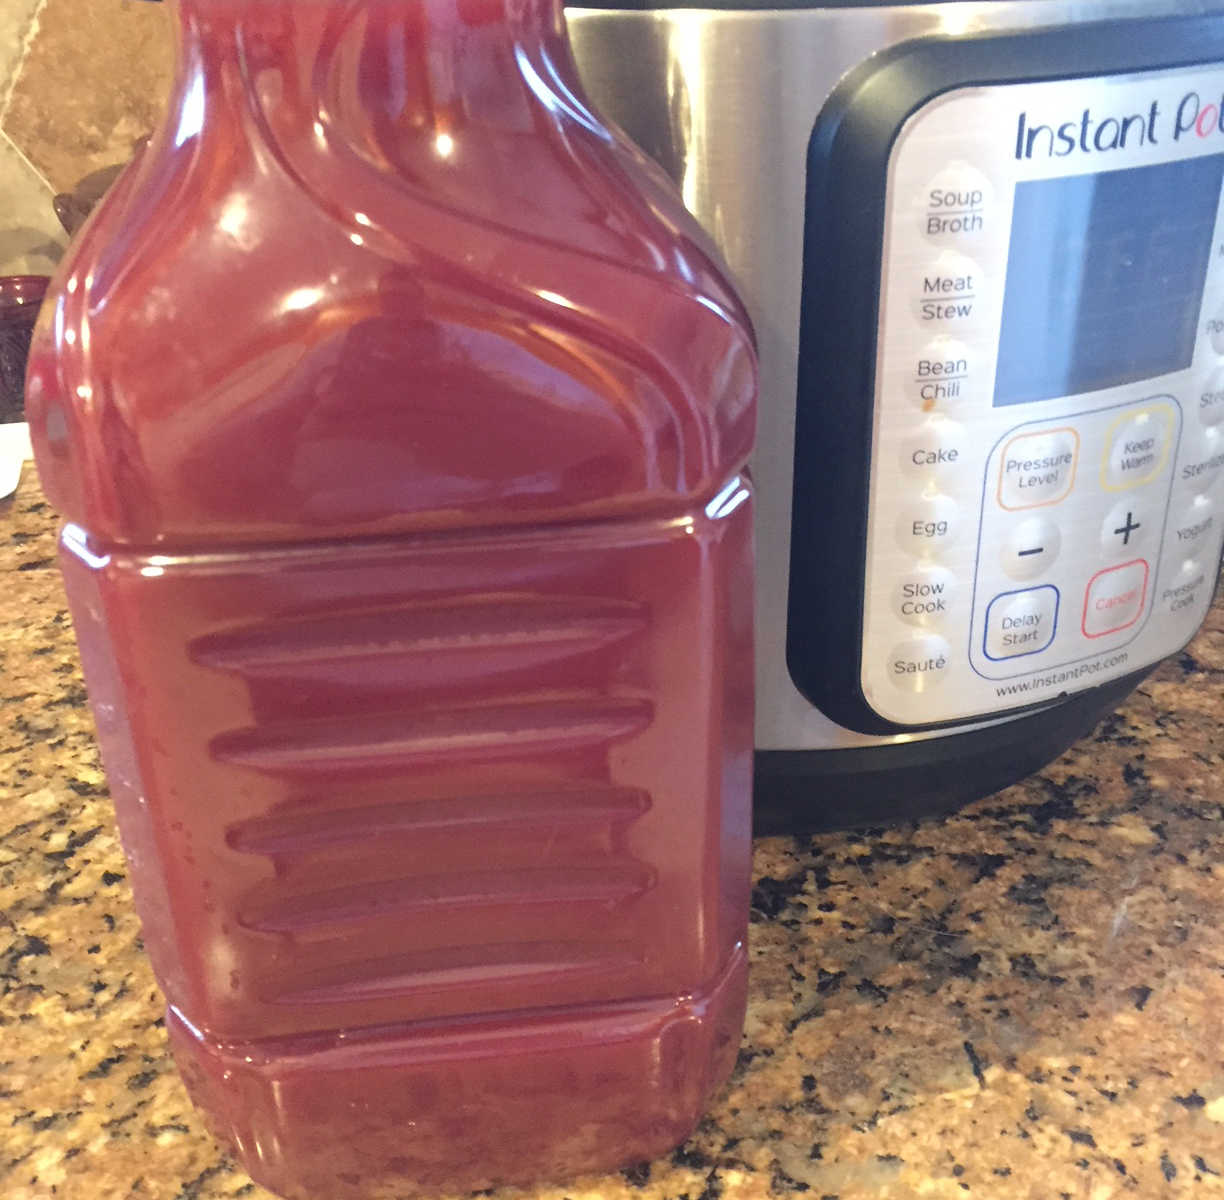 Clear juice jug filled with red wine sitting on kitchen counter next to instant pot